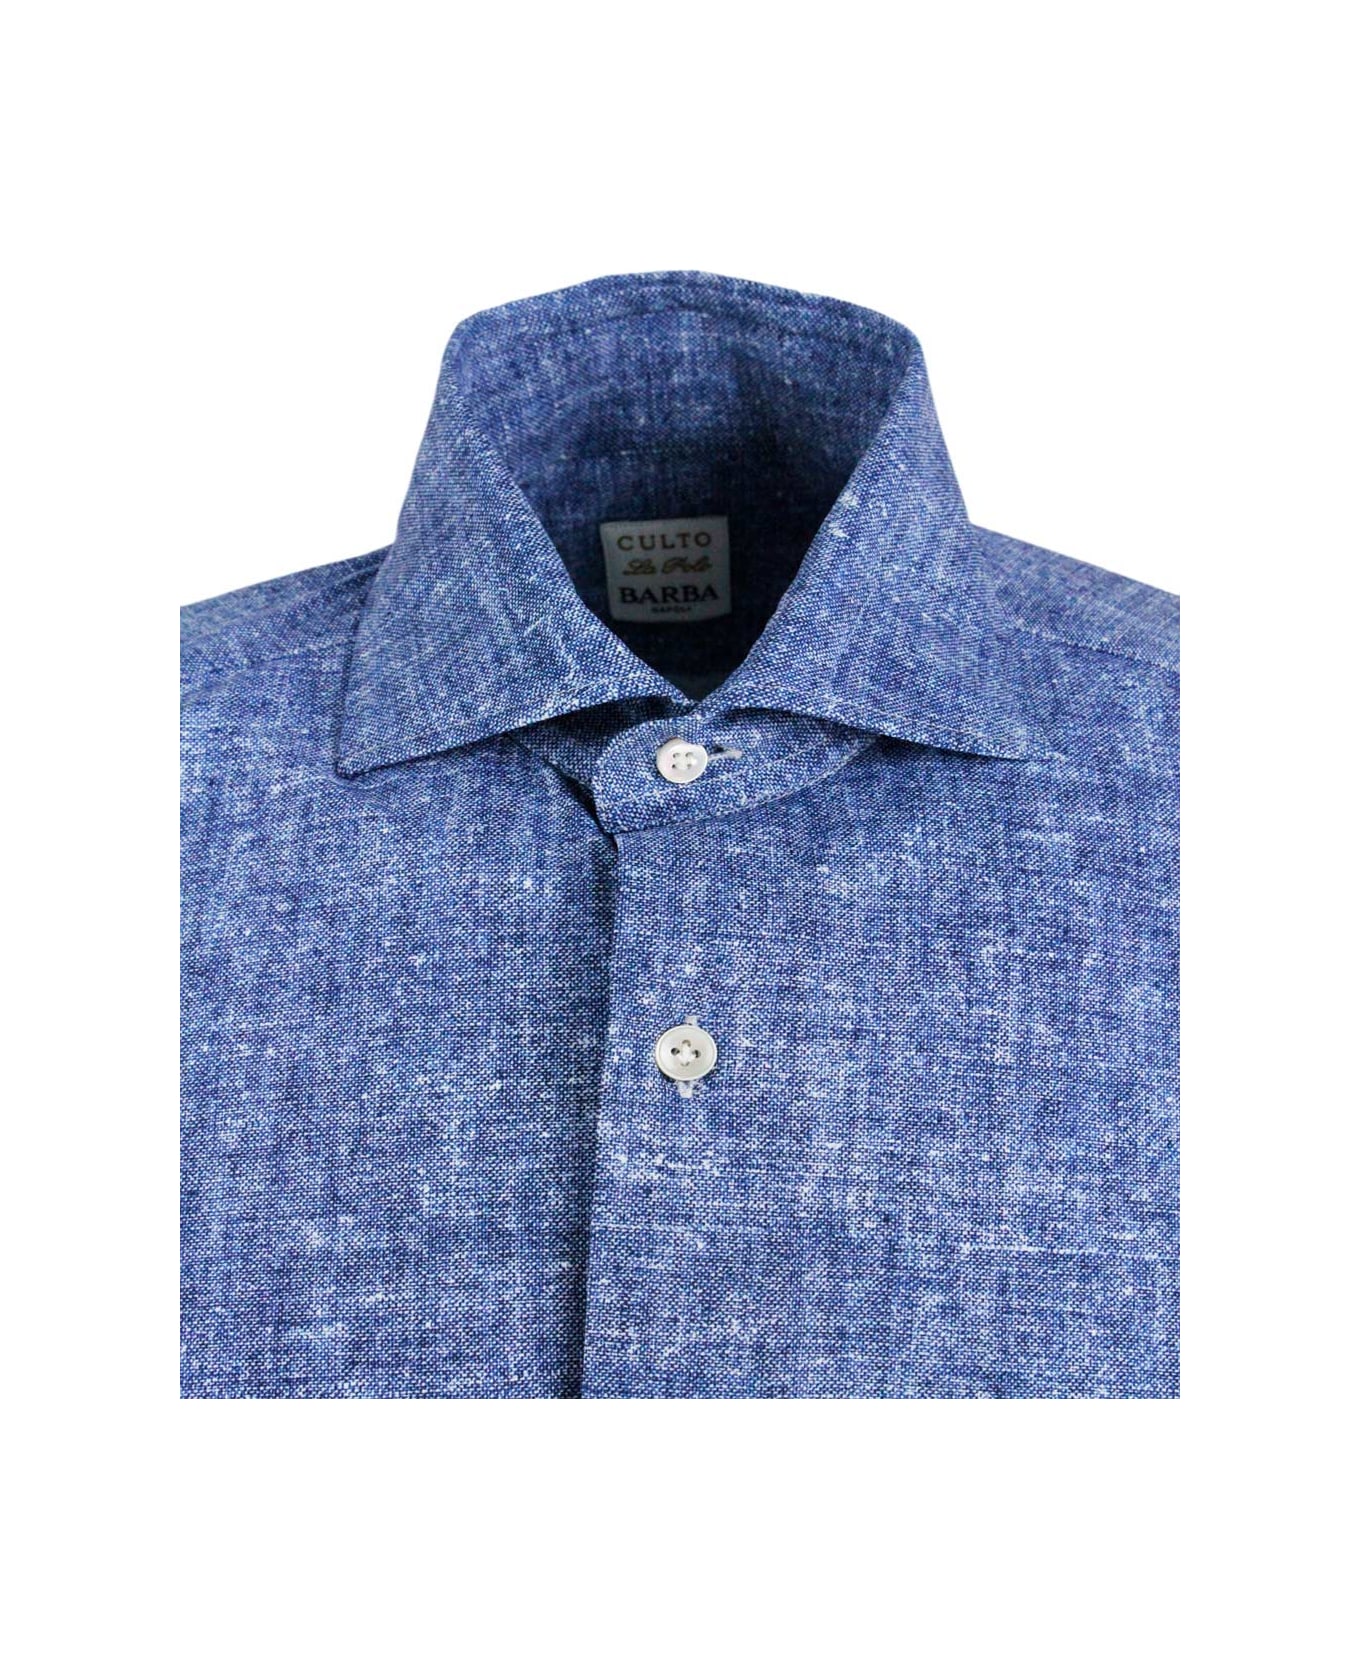 Barba Napoli Cult Shirt In Super Stretch In Denim Melange Color With Mother-of-pearl Buttons And Italian Collar - Denim